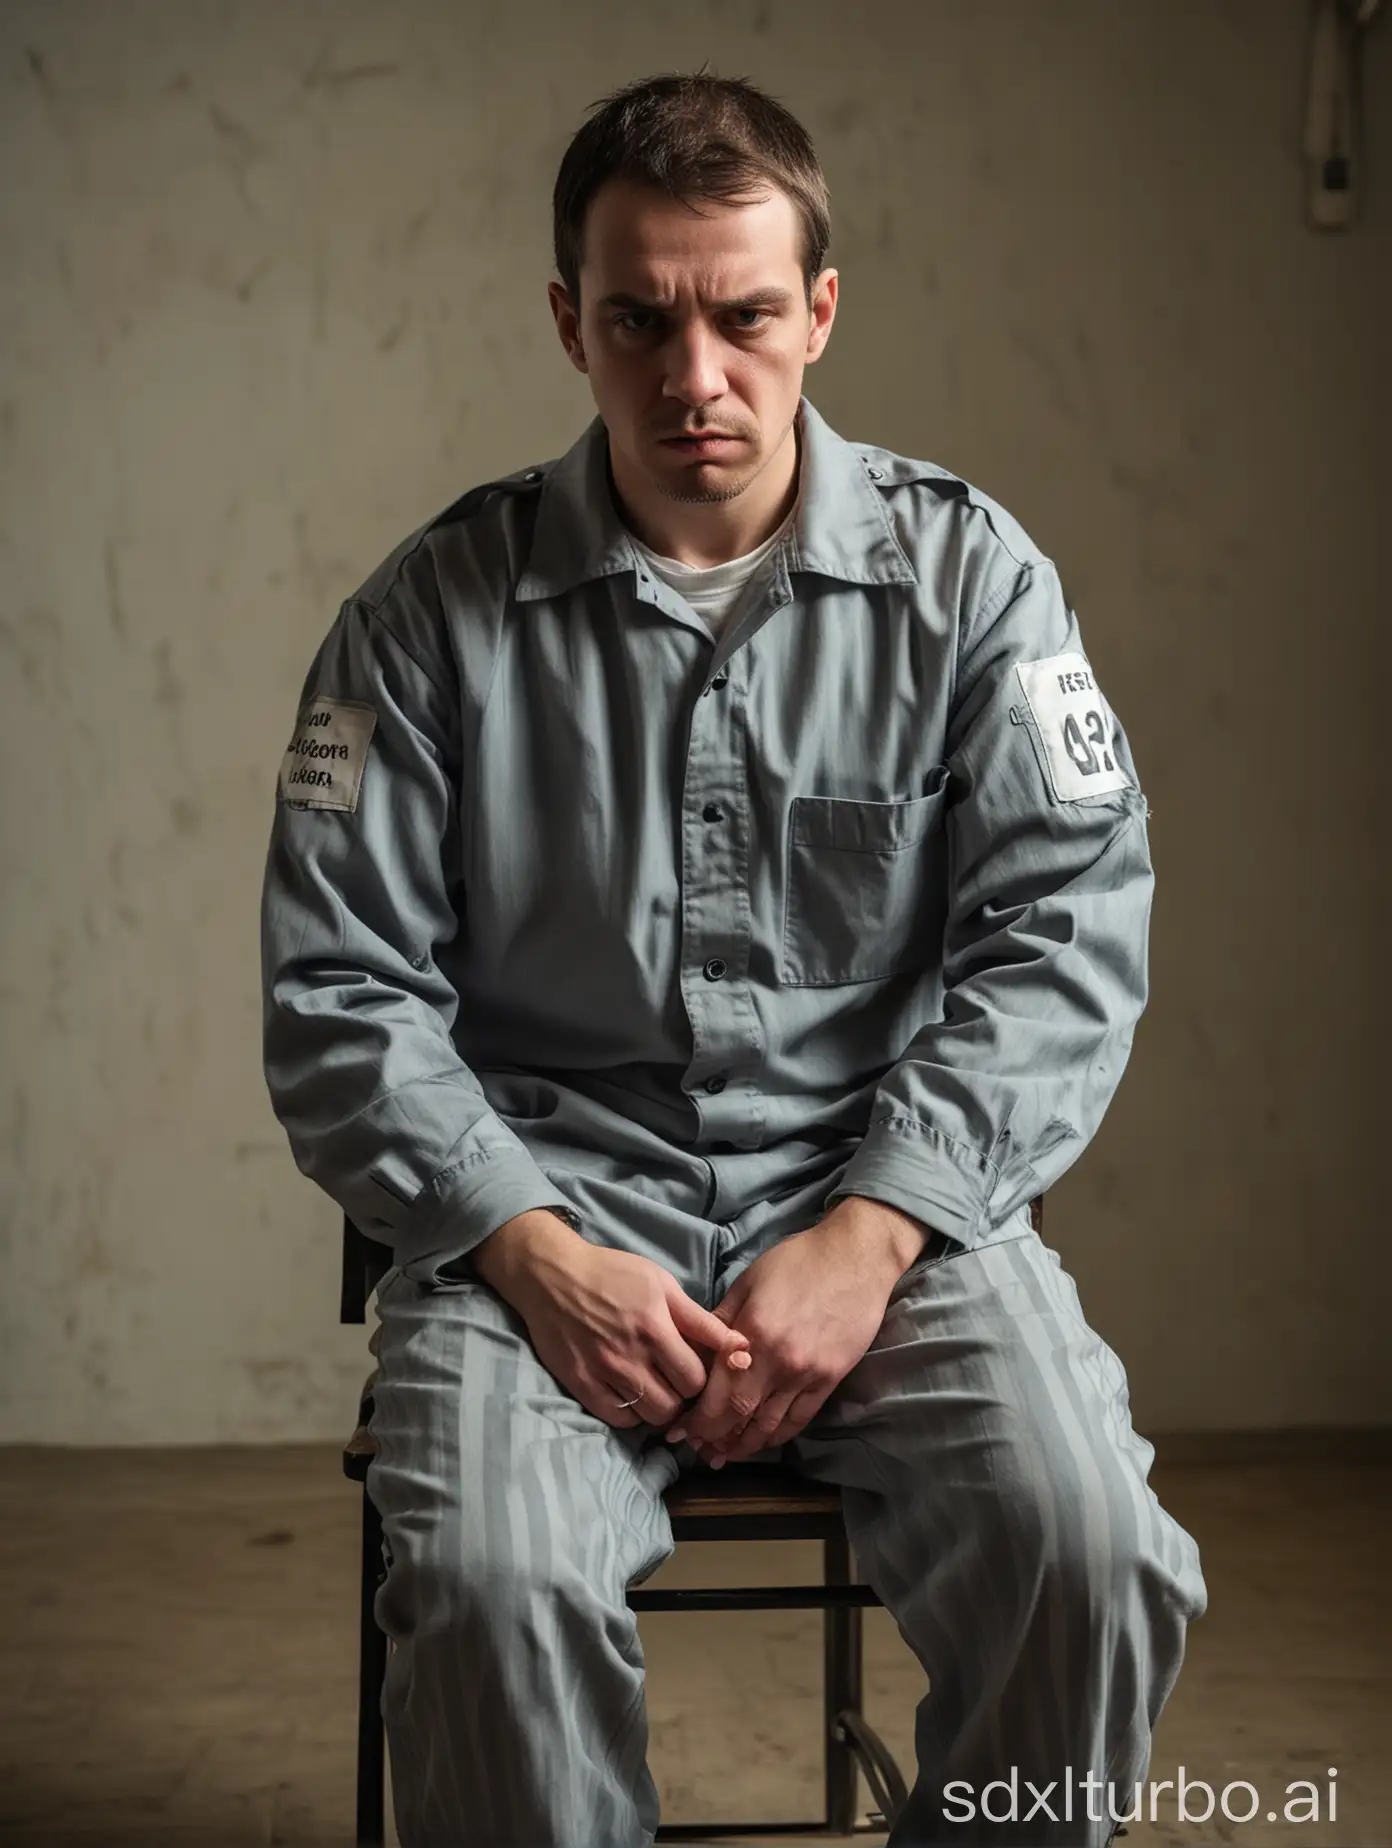 a prisoner wearing a prison uniform, handcuffed, sitting on a chair being questioned, the chair is part of a table. He is glancing sideways with a anxious expression, speaking about the situation at that time.